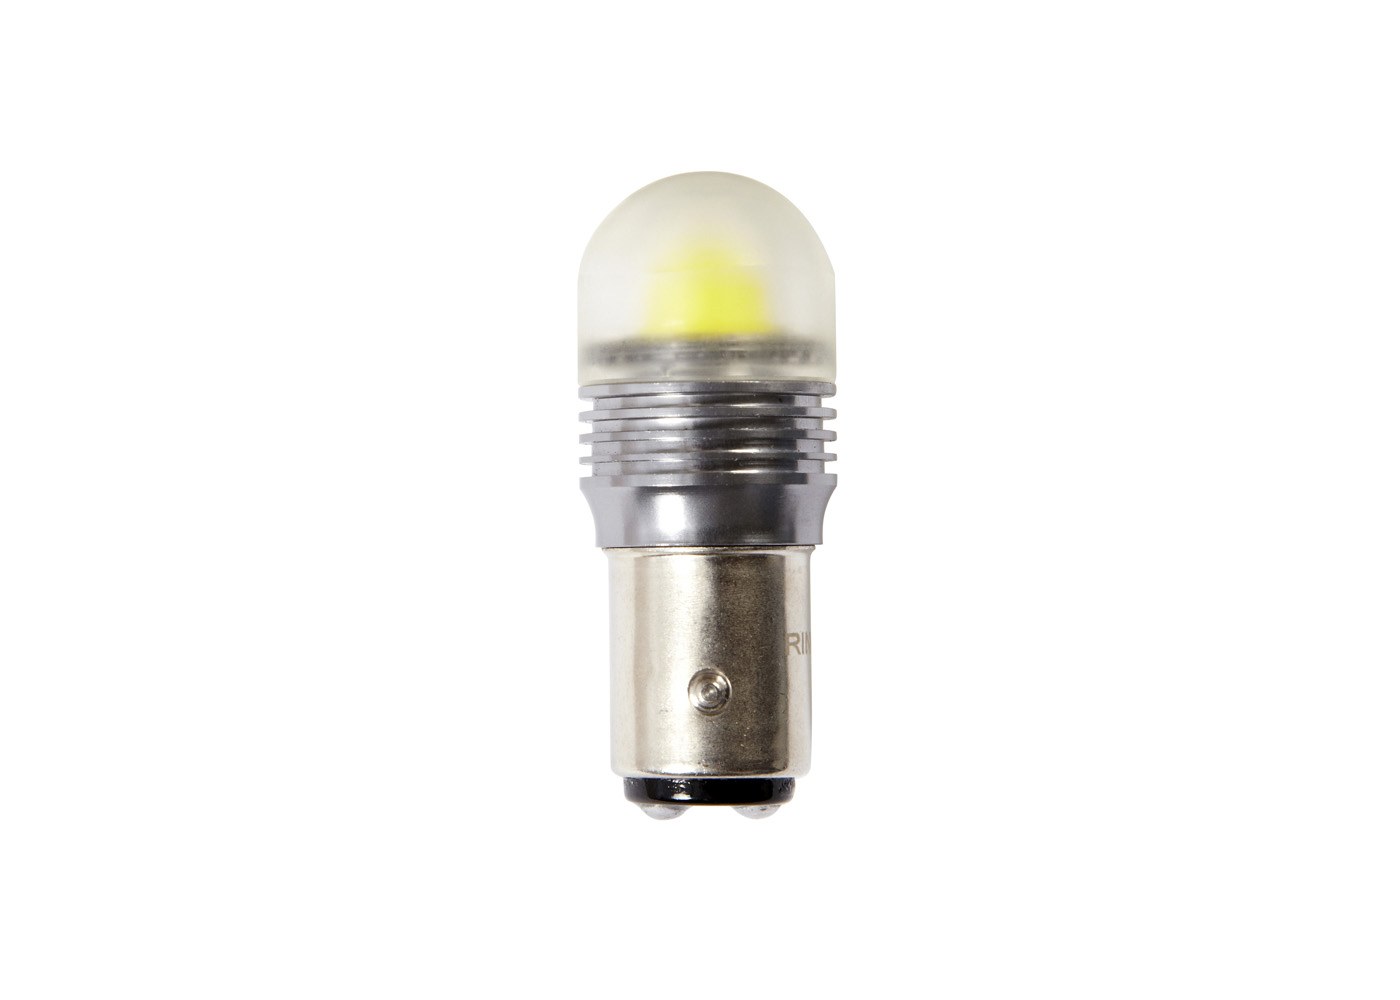 12V P21/5W 380 Ampoule LED perfomance, RW380DLED